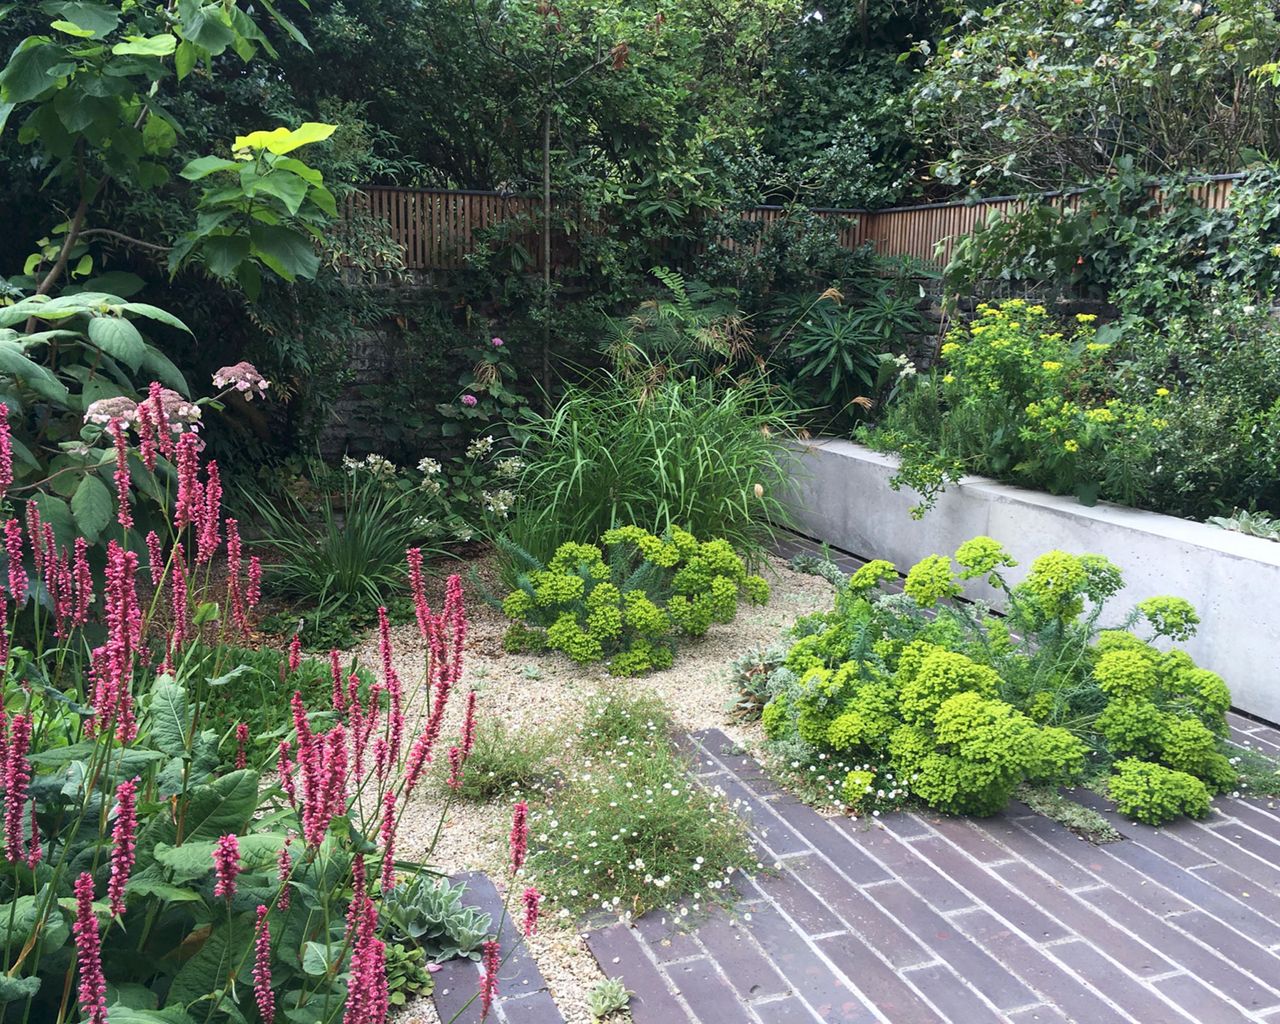 How to plan a dry garden: Ideas for landscaping and plants | Country